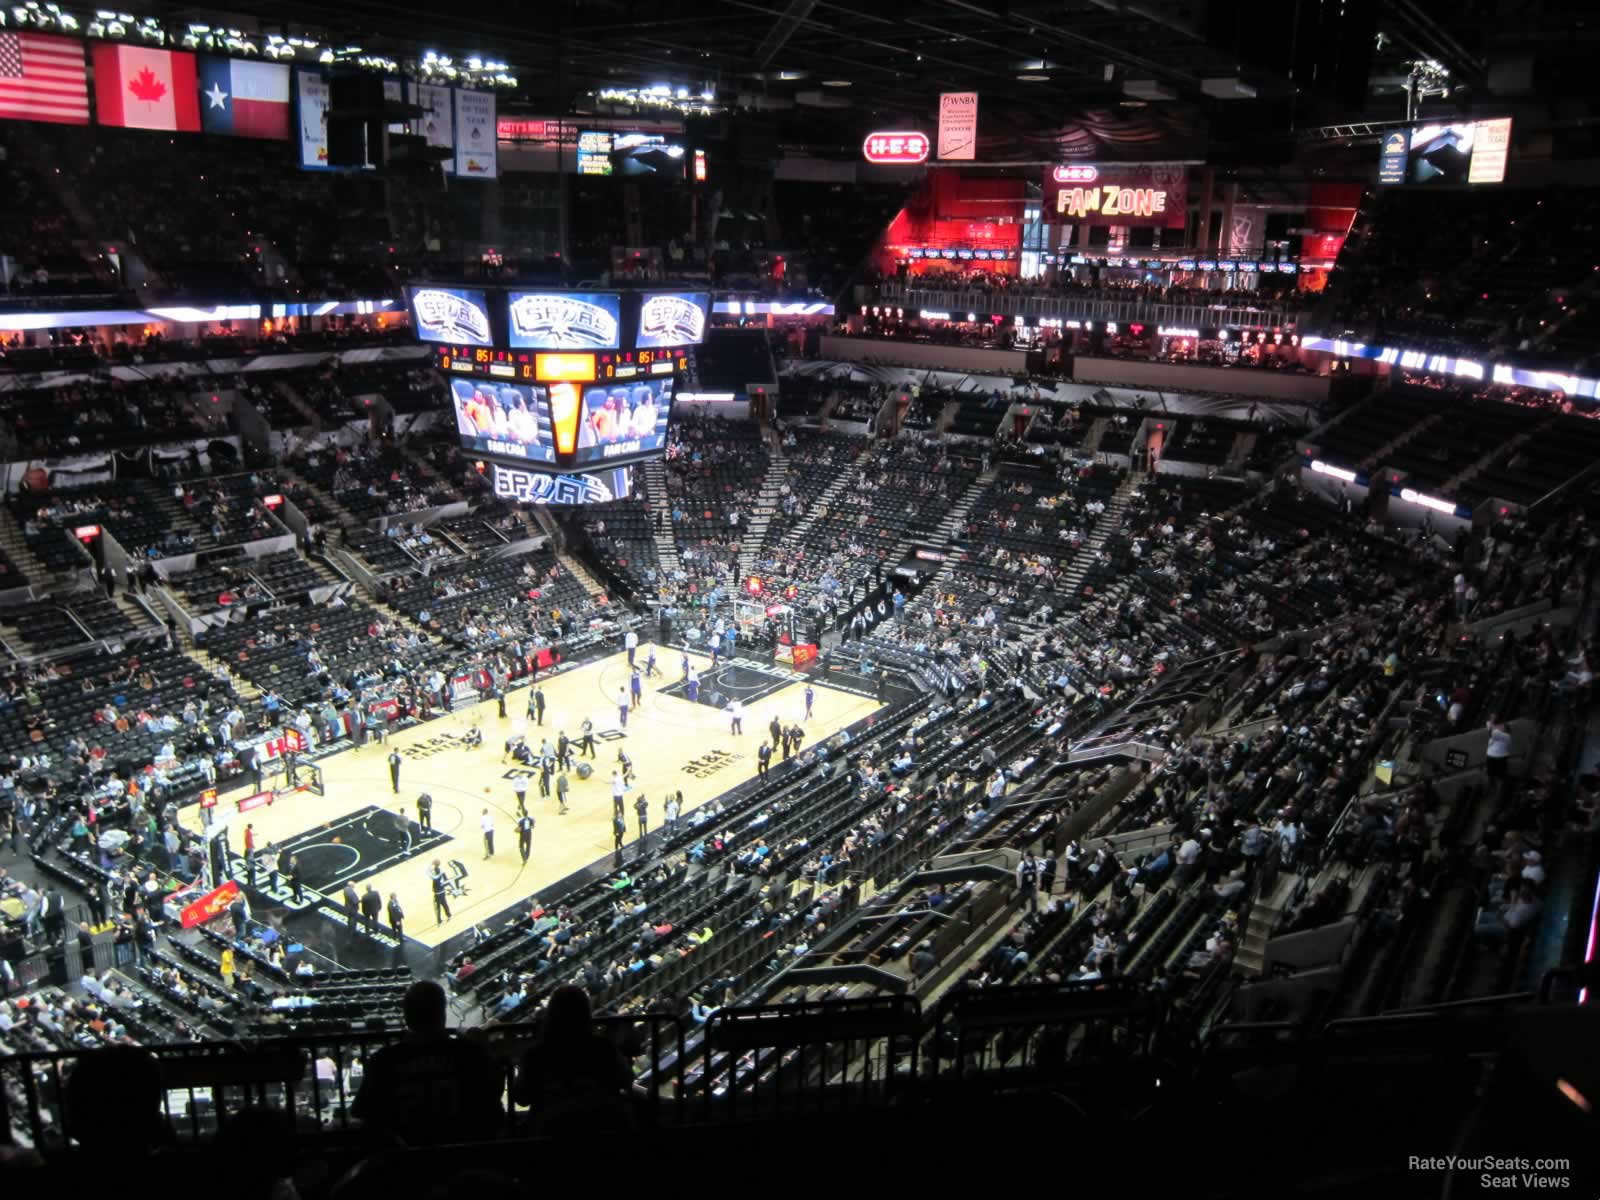 section 228, row 9 seat view  for basketball - at&t center